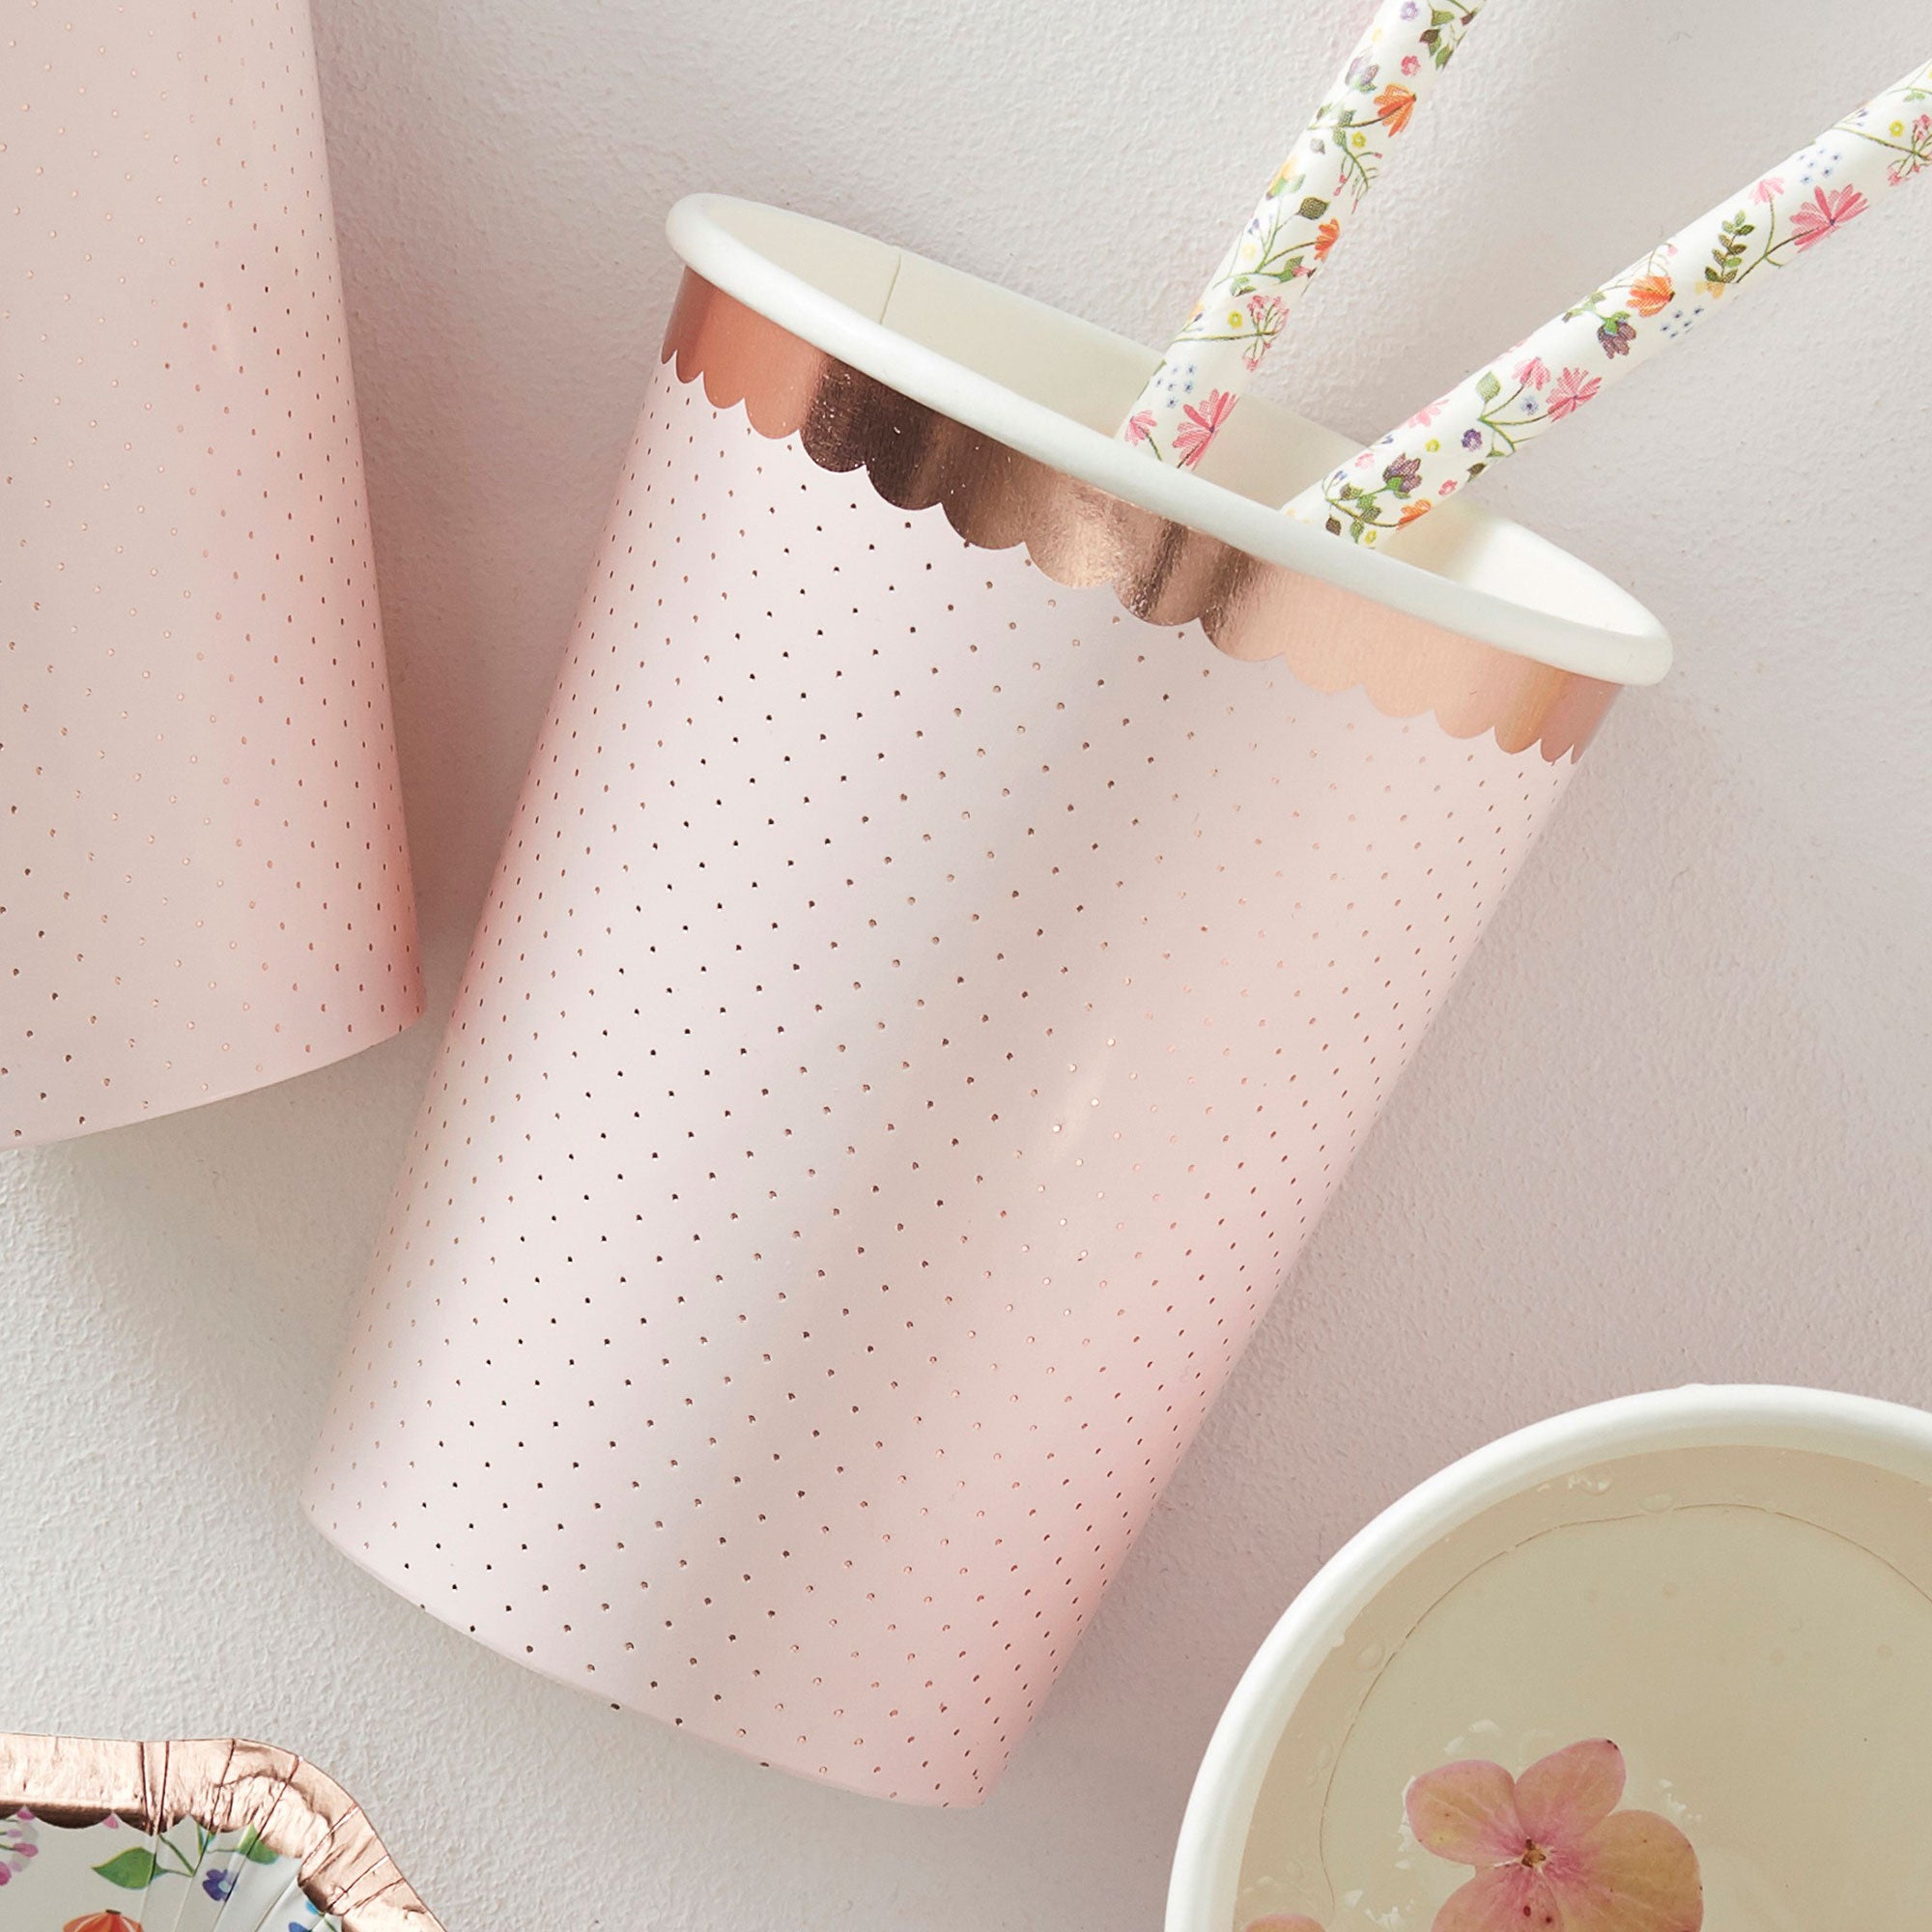 Ditsy Floral Rose Gold Spotty Paper Cups